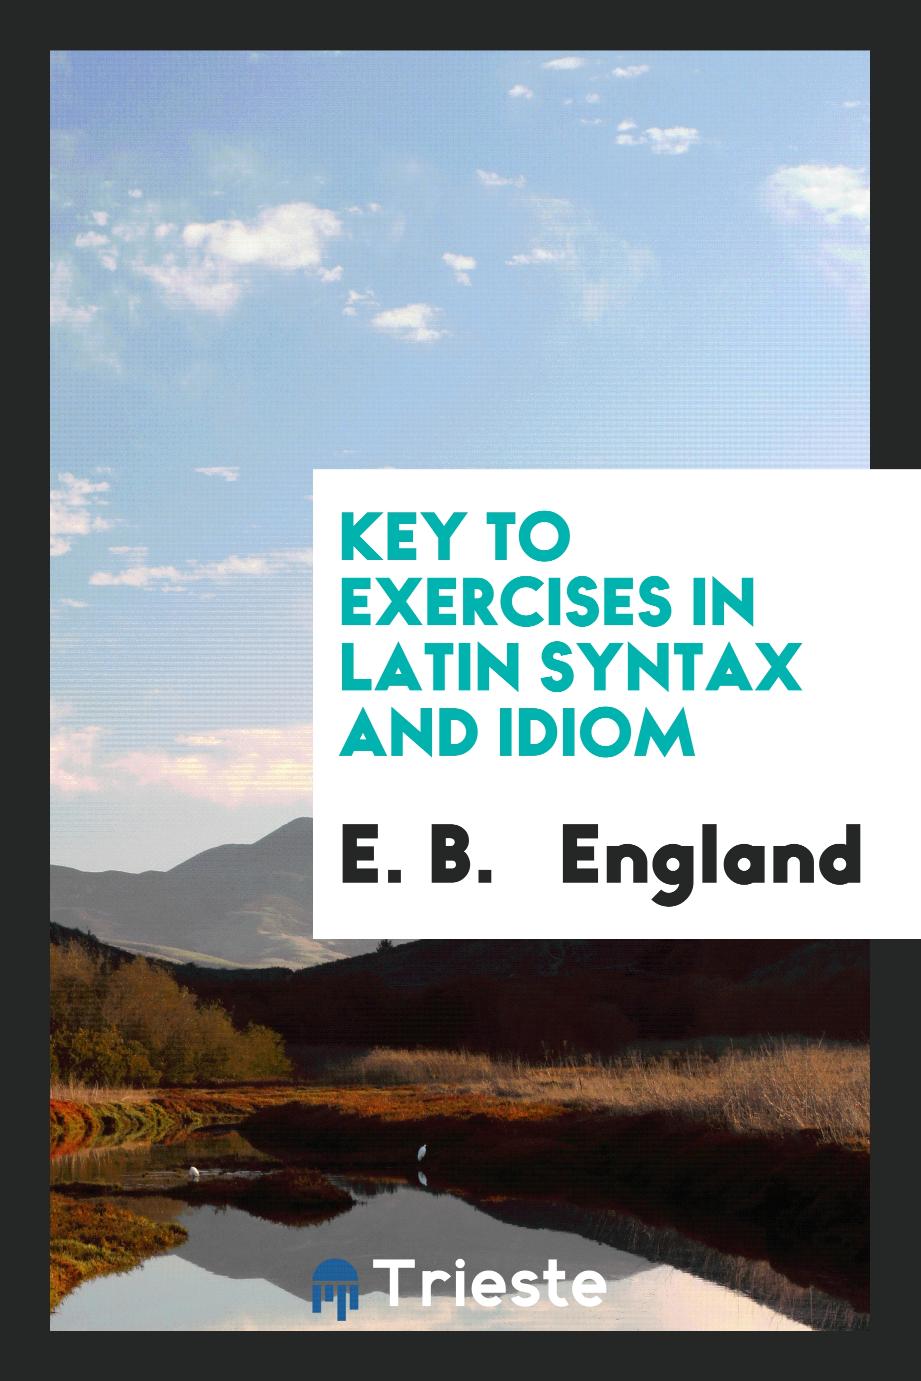 Key to exercises in Latin syntax and idiom